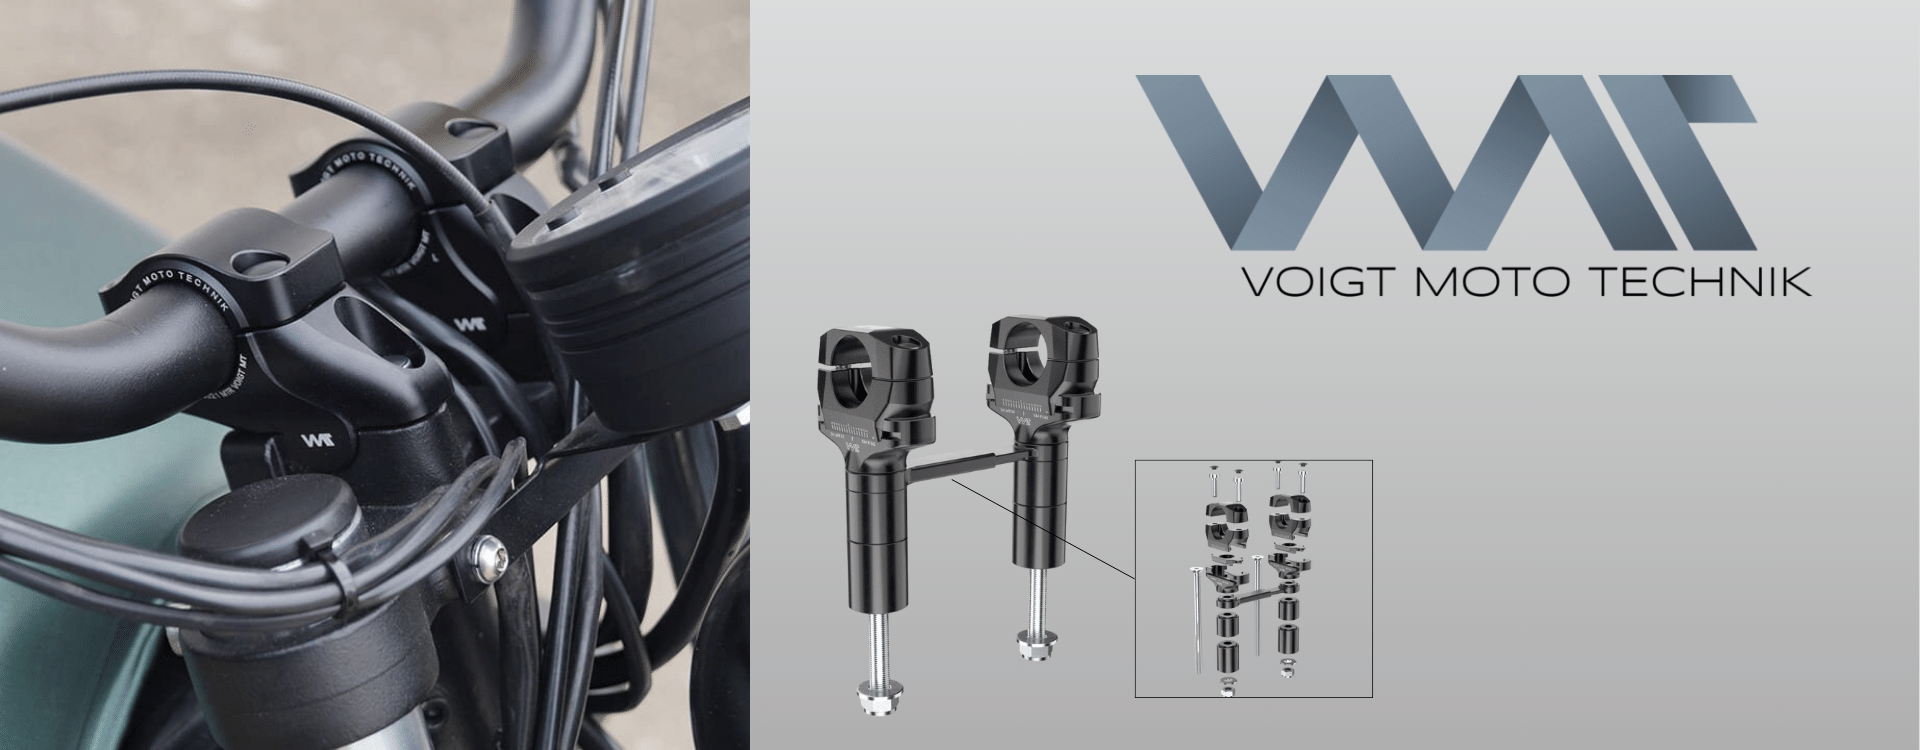 Voigt handlebar risers: the best risers for your motorcycle!